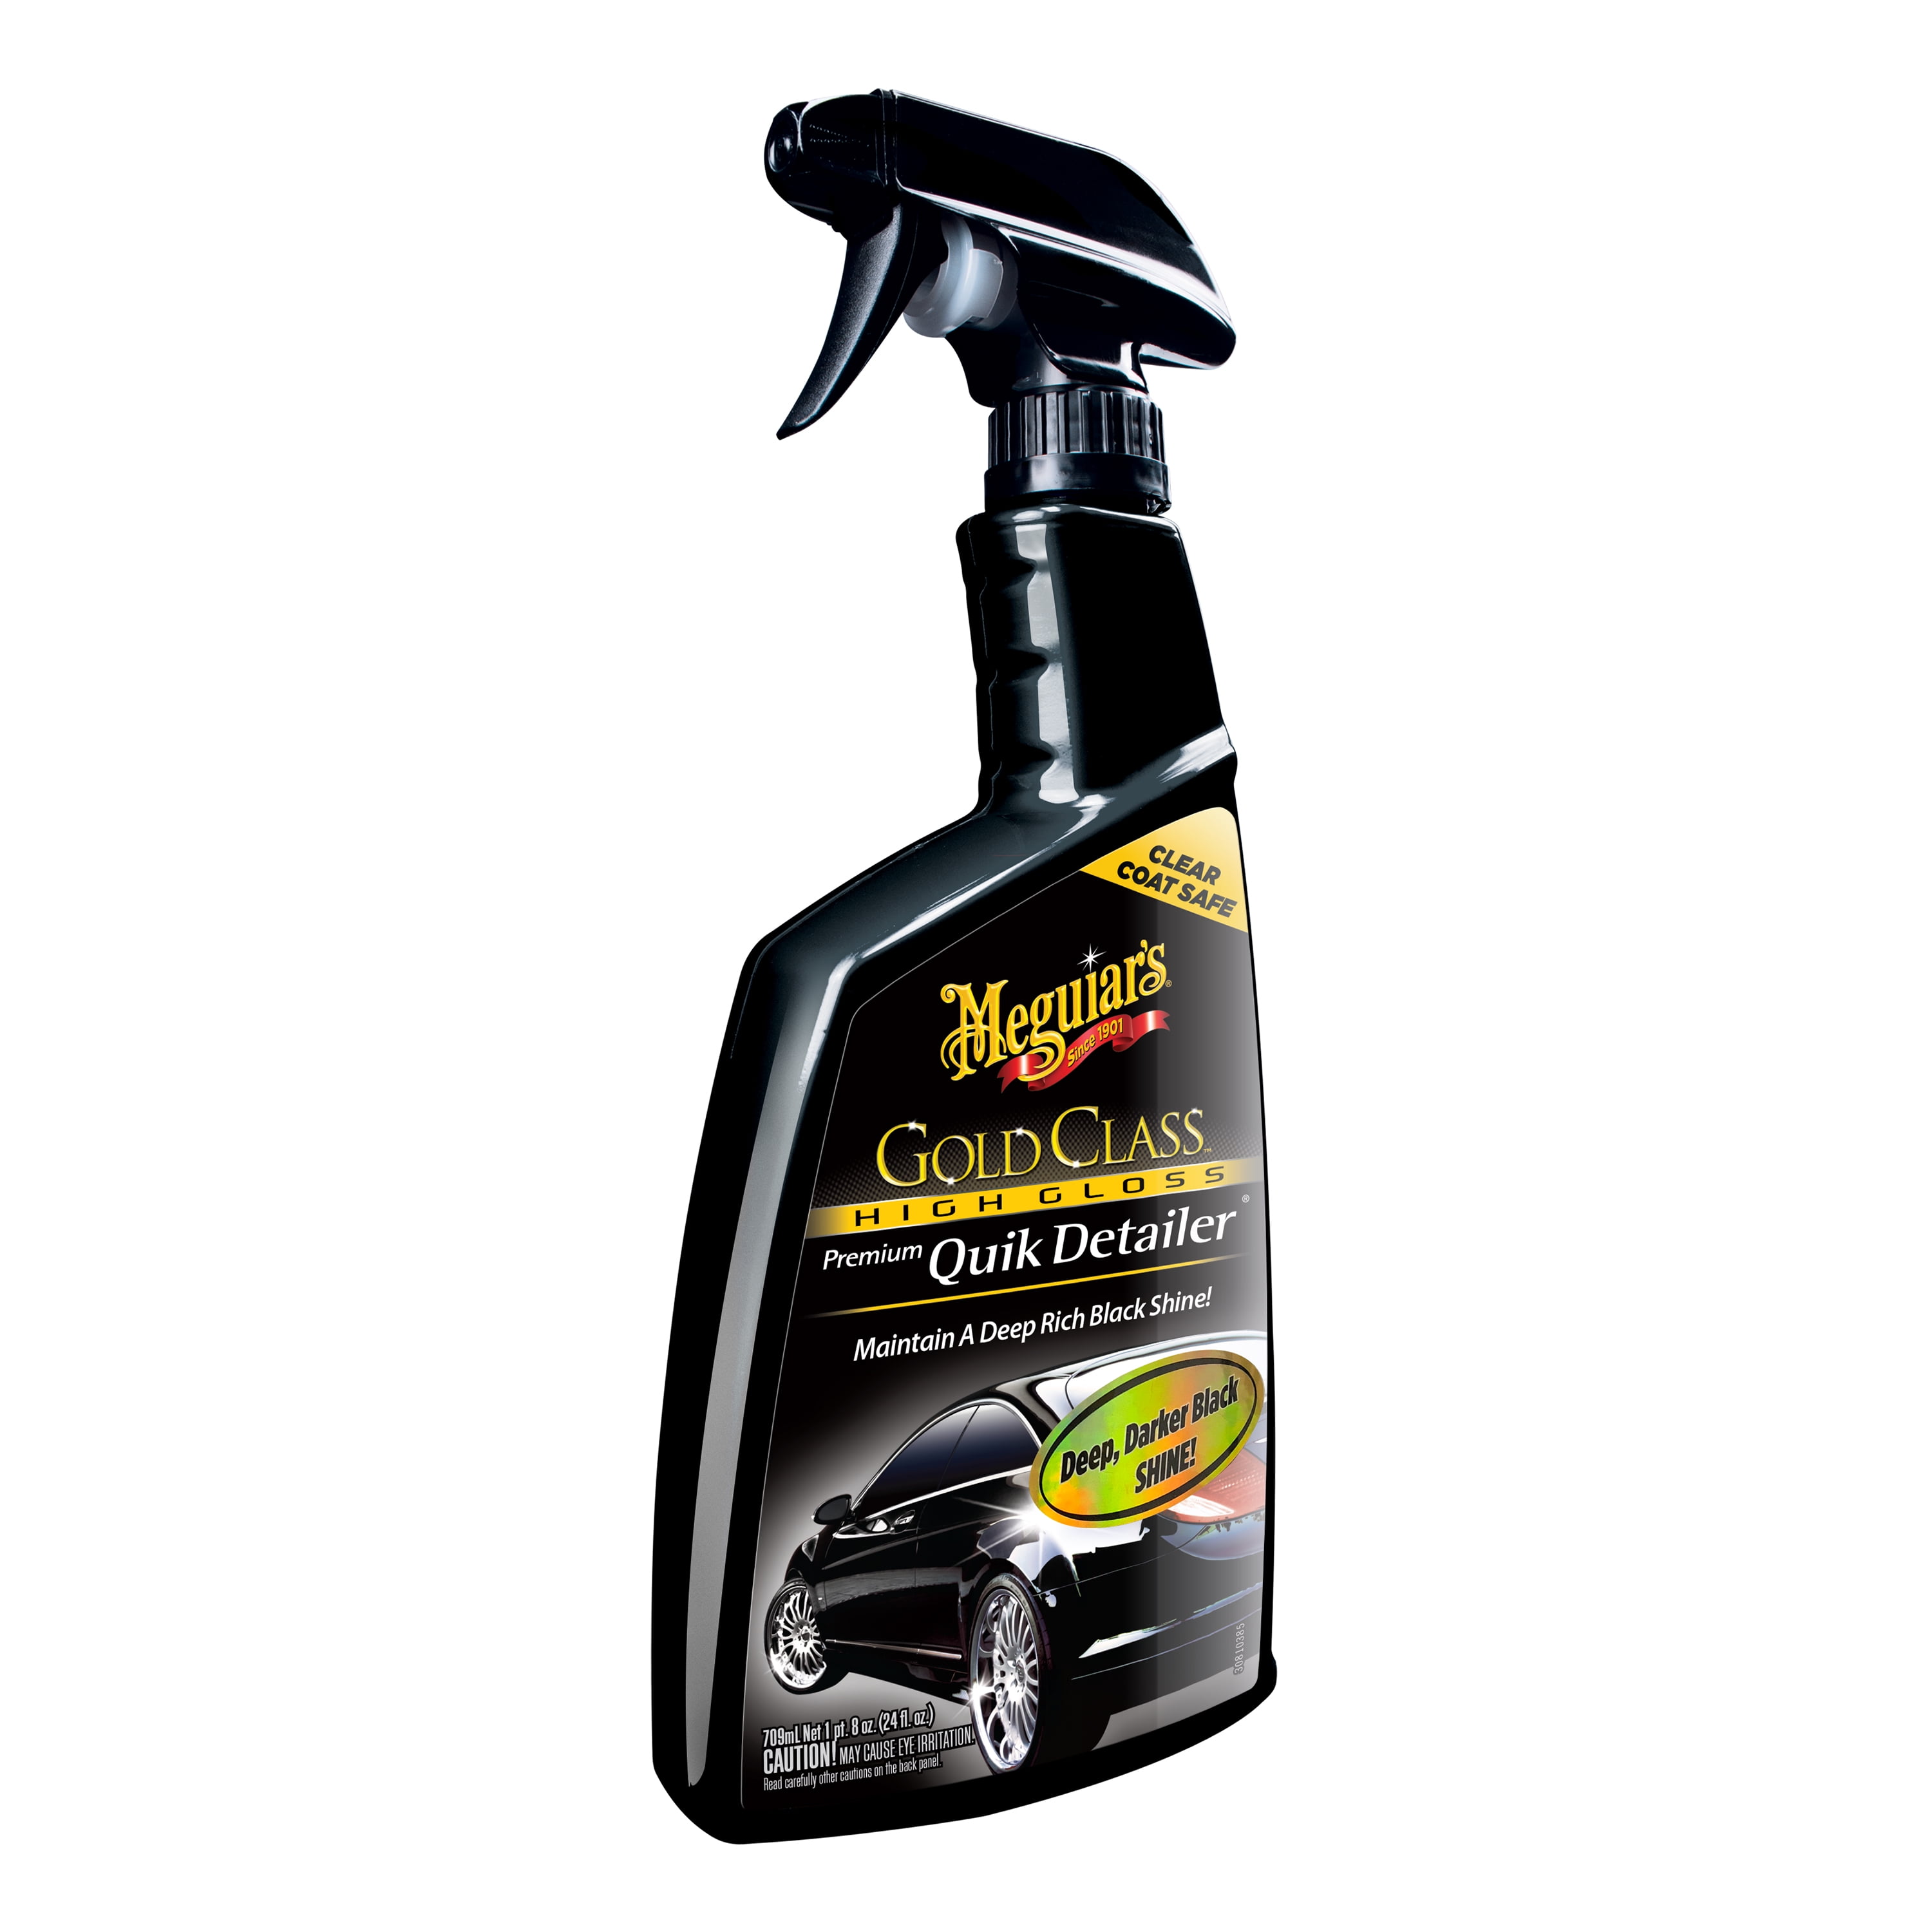 Detailer's Choice Combo Kit with Car Duster and Quick Shine 10968K